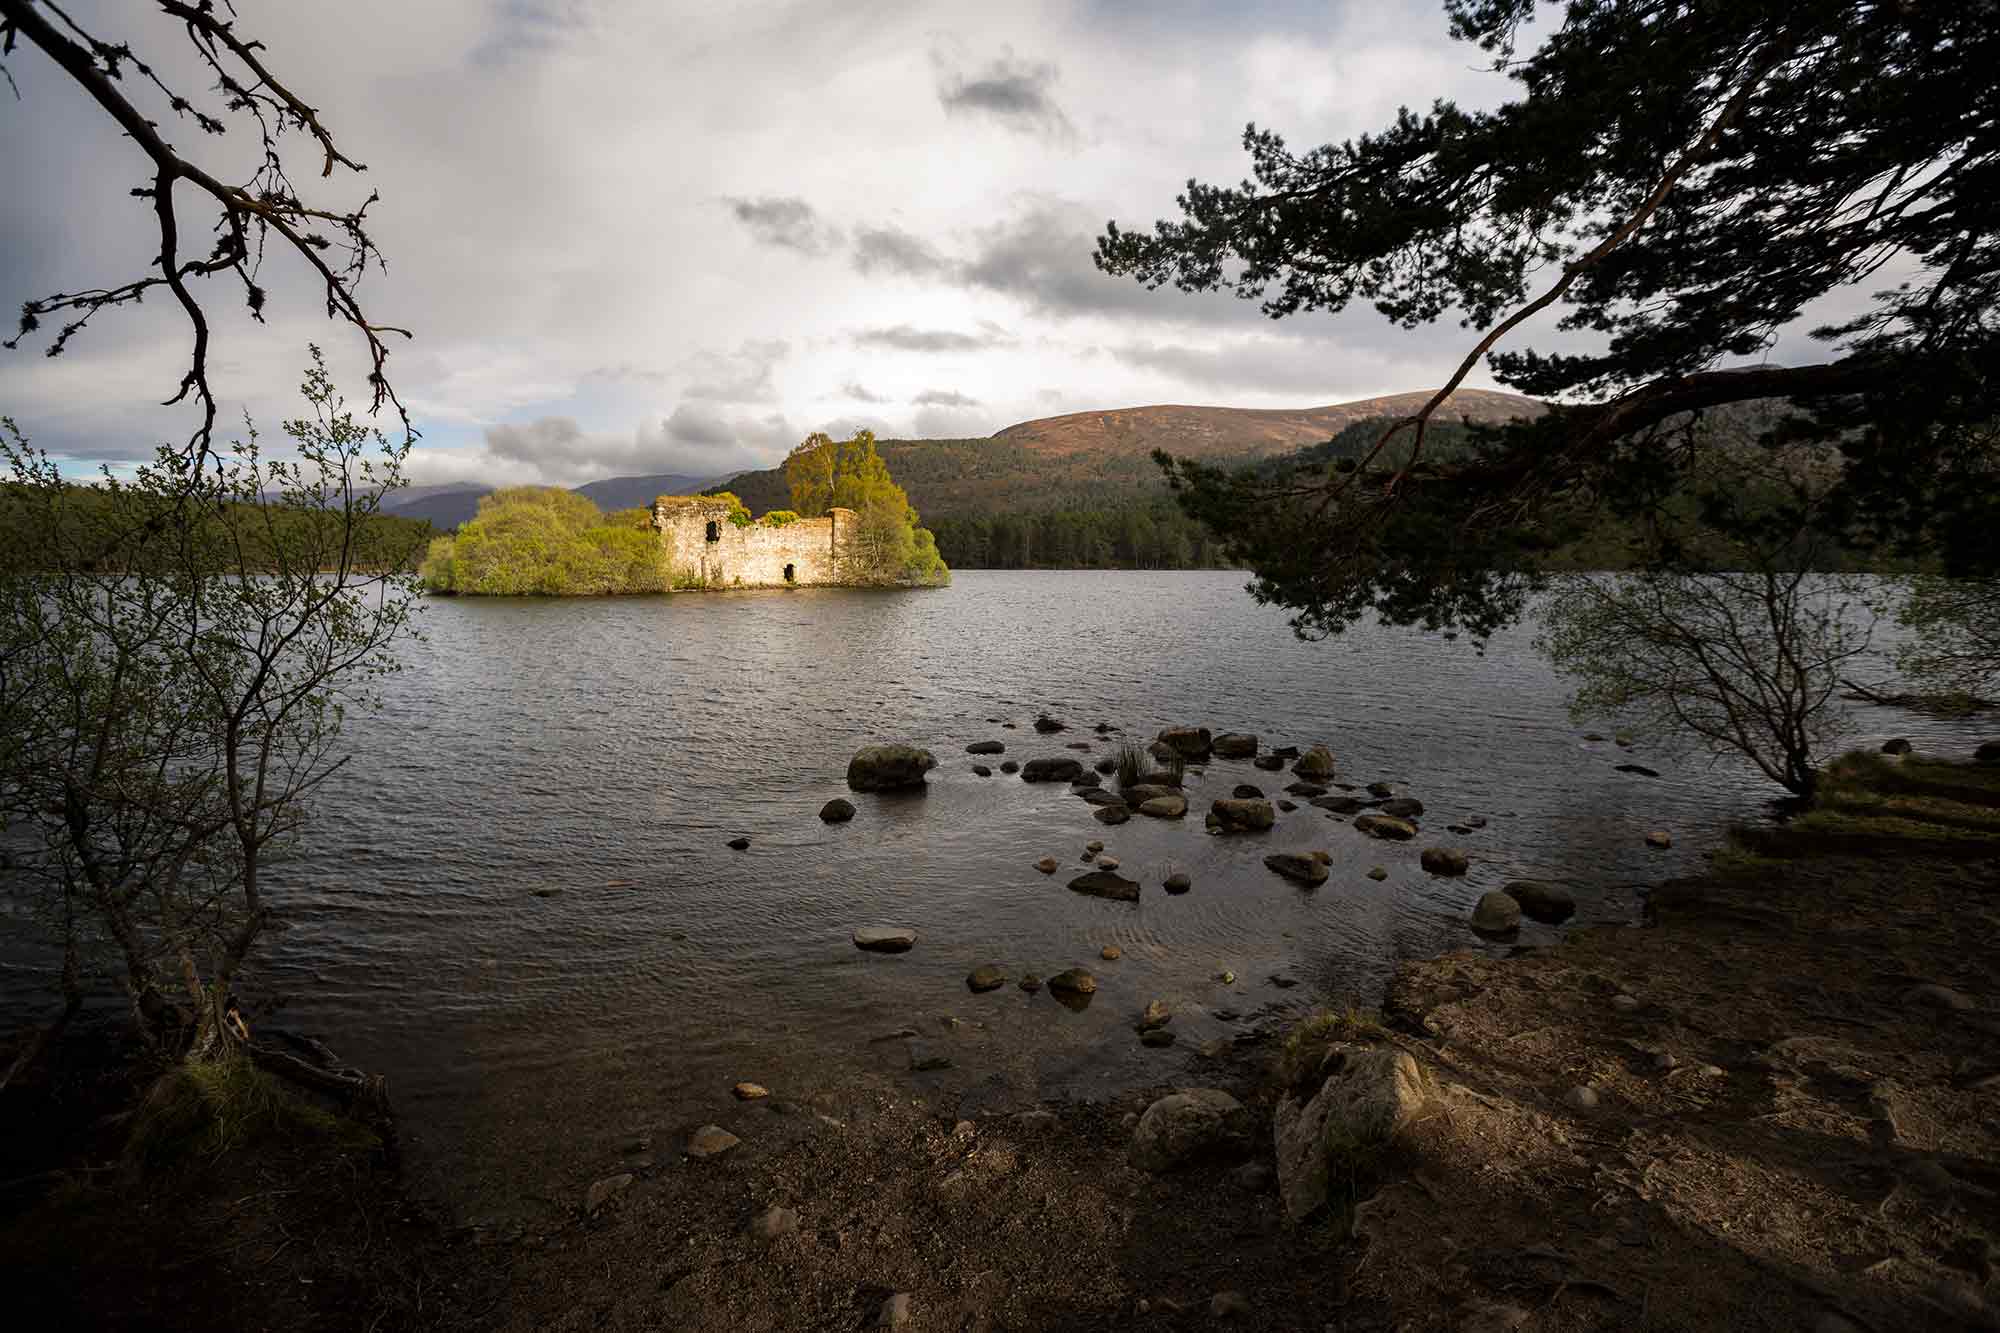 The 13th century island castle stands in the middle of Loch an Eilein and was built as a natural defensive site. © ULLI MAIER & NISA MAIER